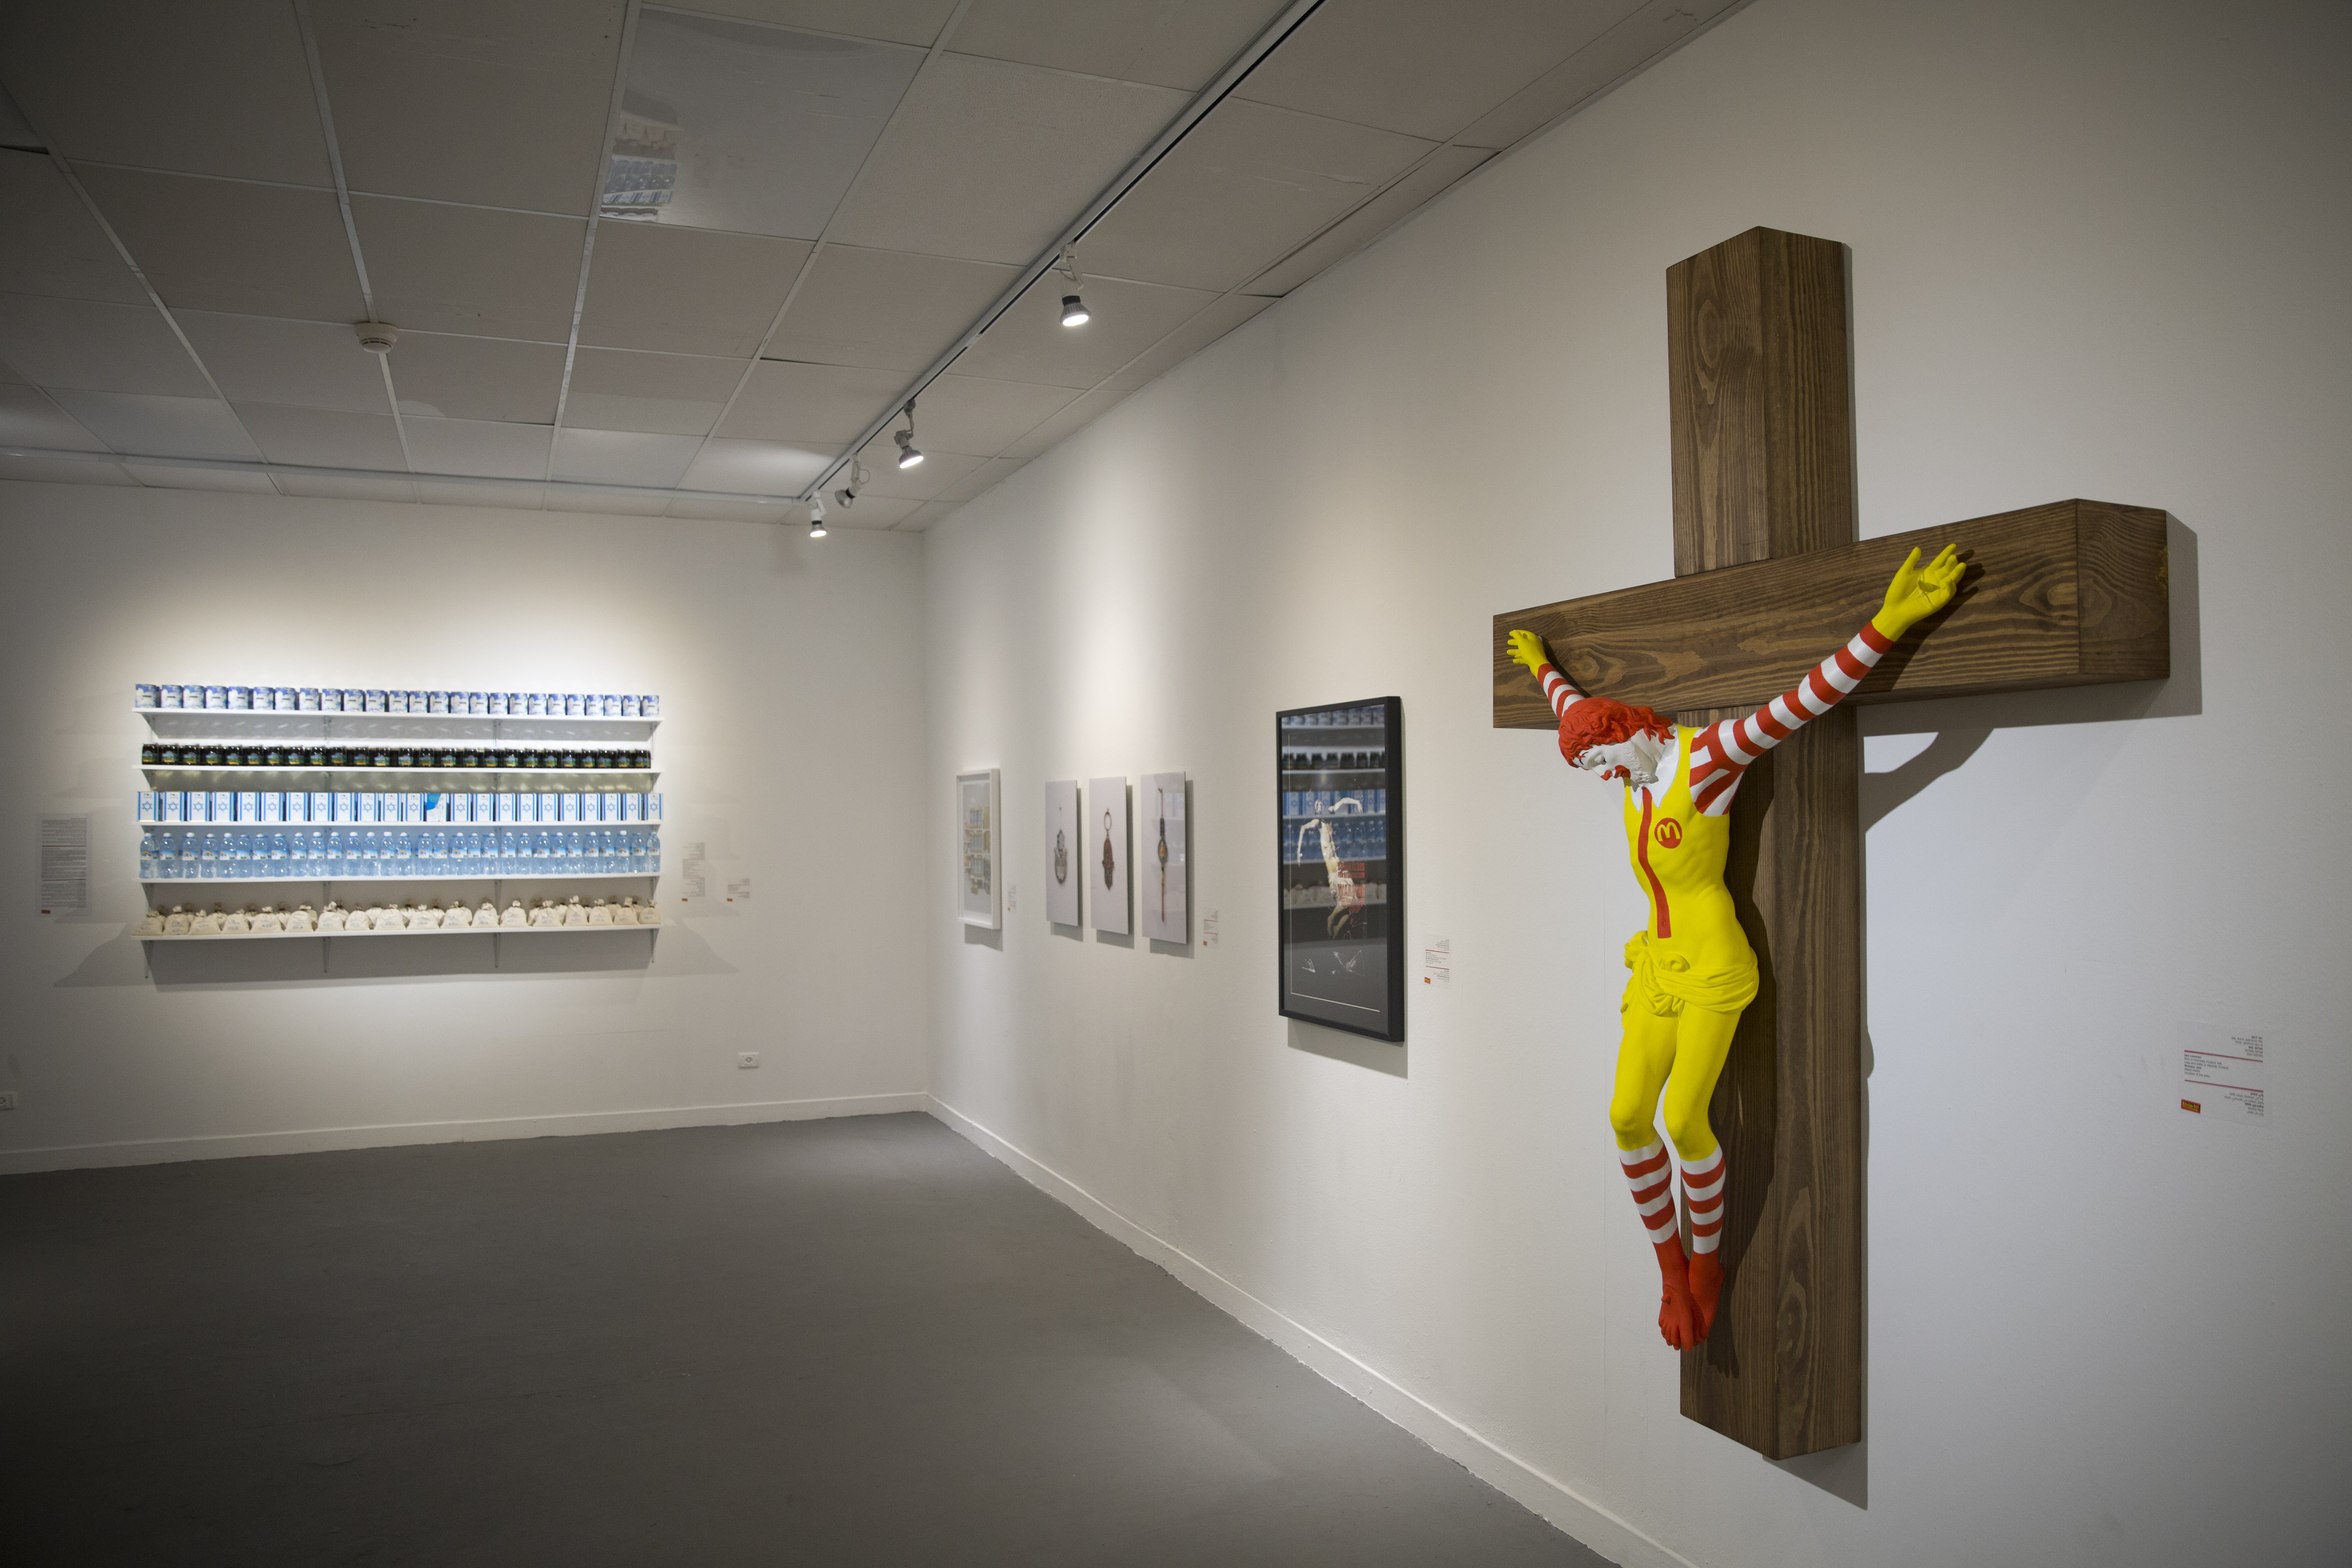 An artwork called McJesus, which was sculpted by Finnish artist Jani Leinonen and depicts a crucified Ronald McDonald, is seen on display as part of the Haifa museum's Sacred Goods exhibit in Haifa, Israel